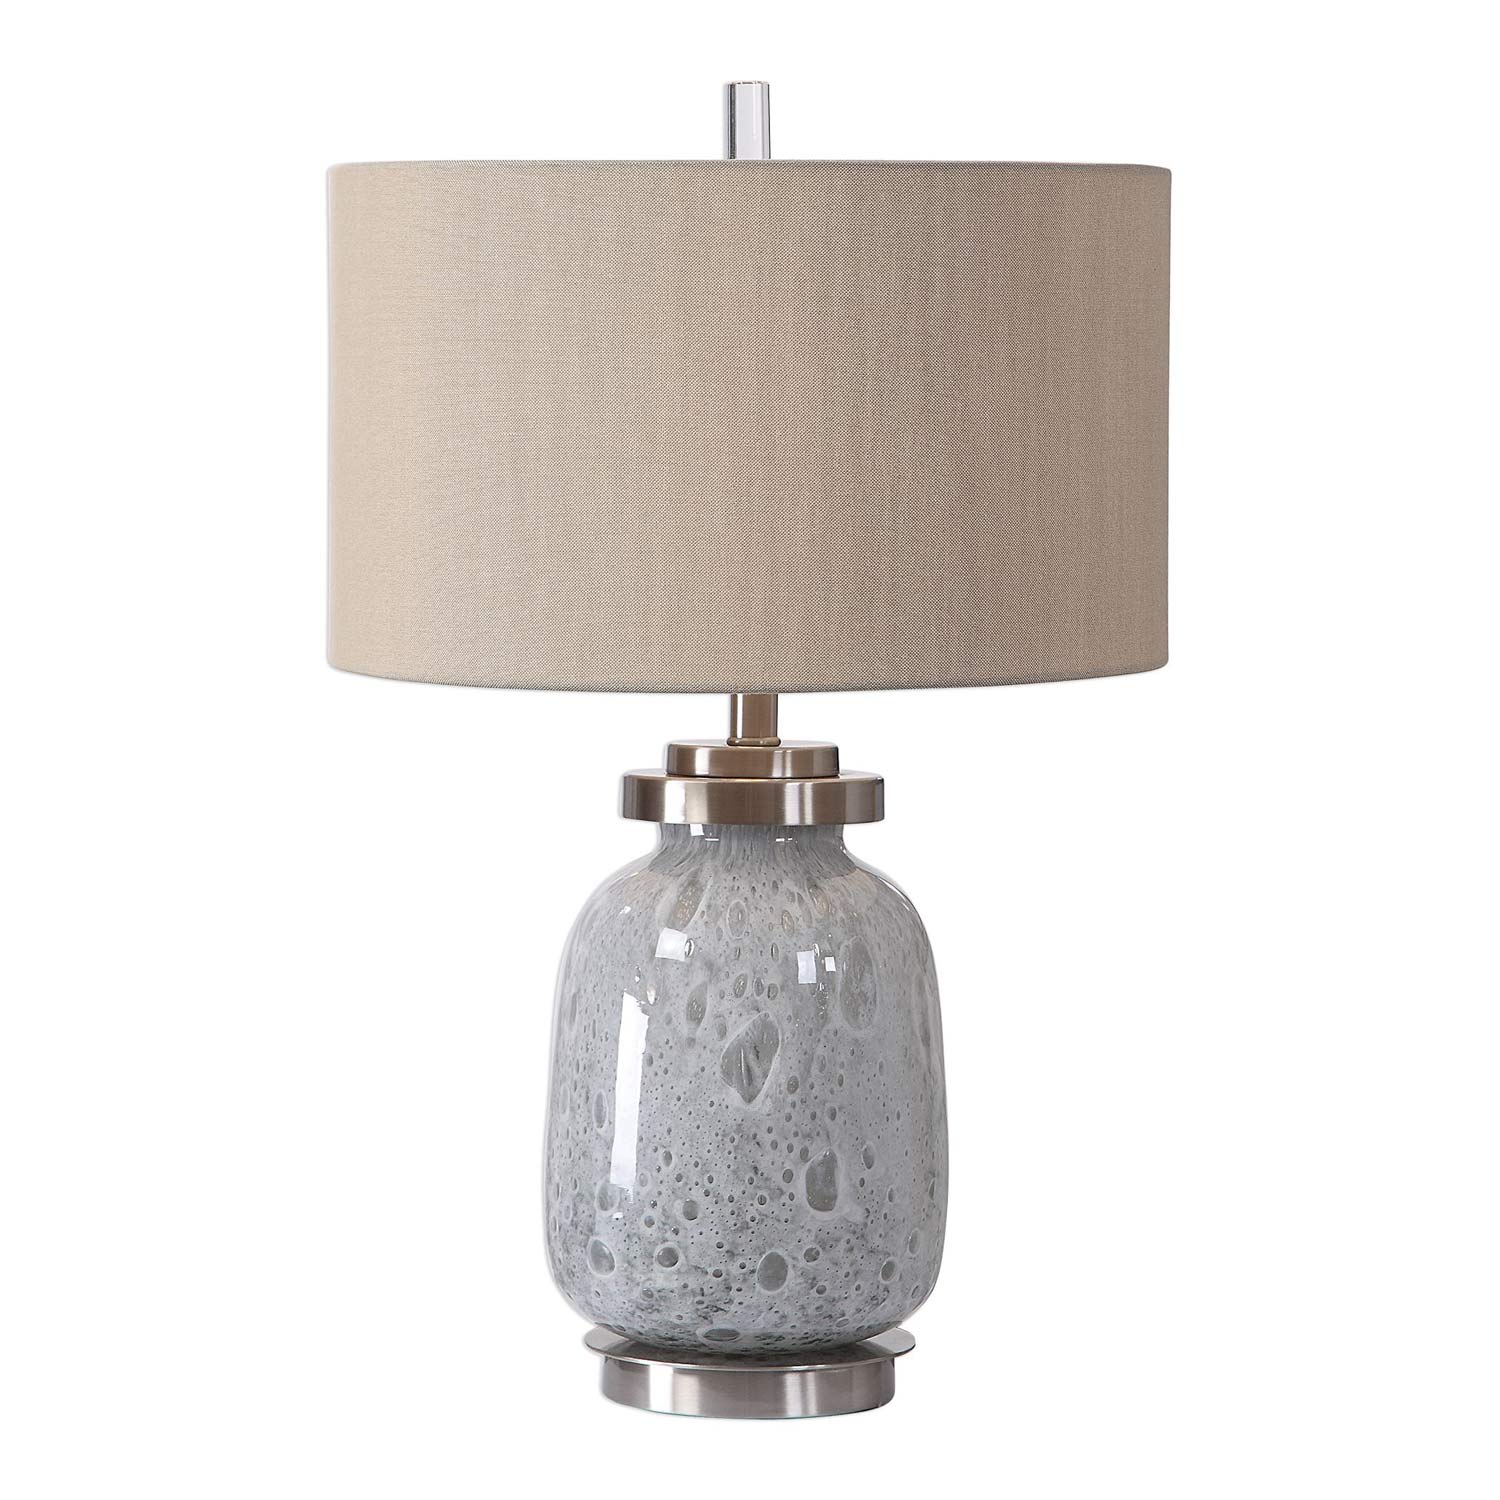 Uttermost Eleanore Table Lamp - Blue Gray